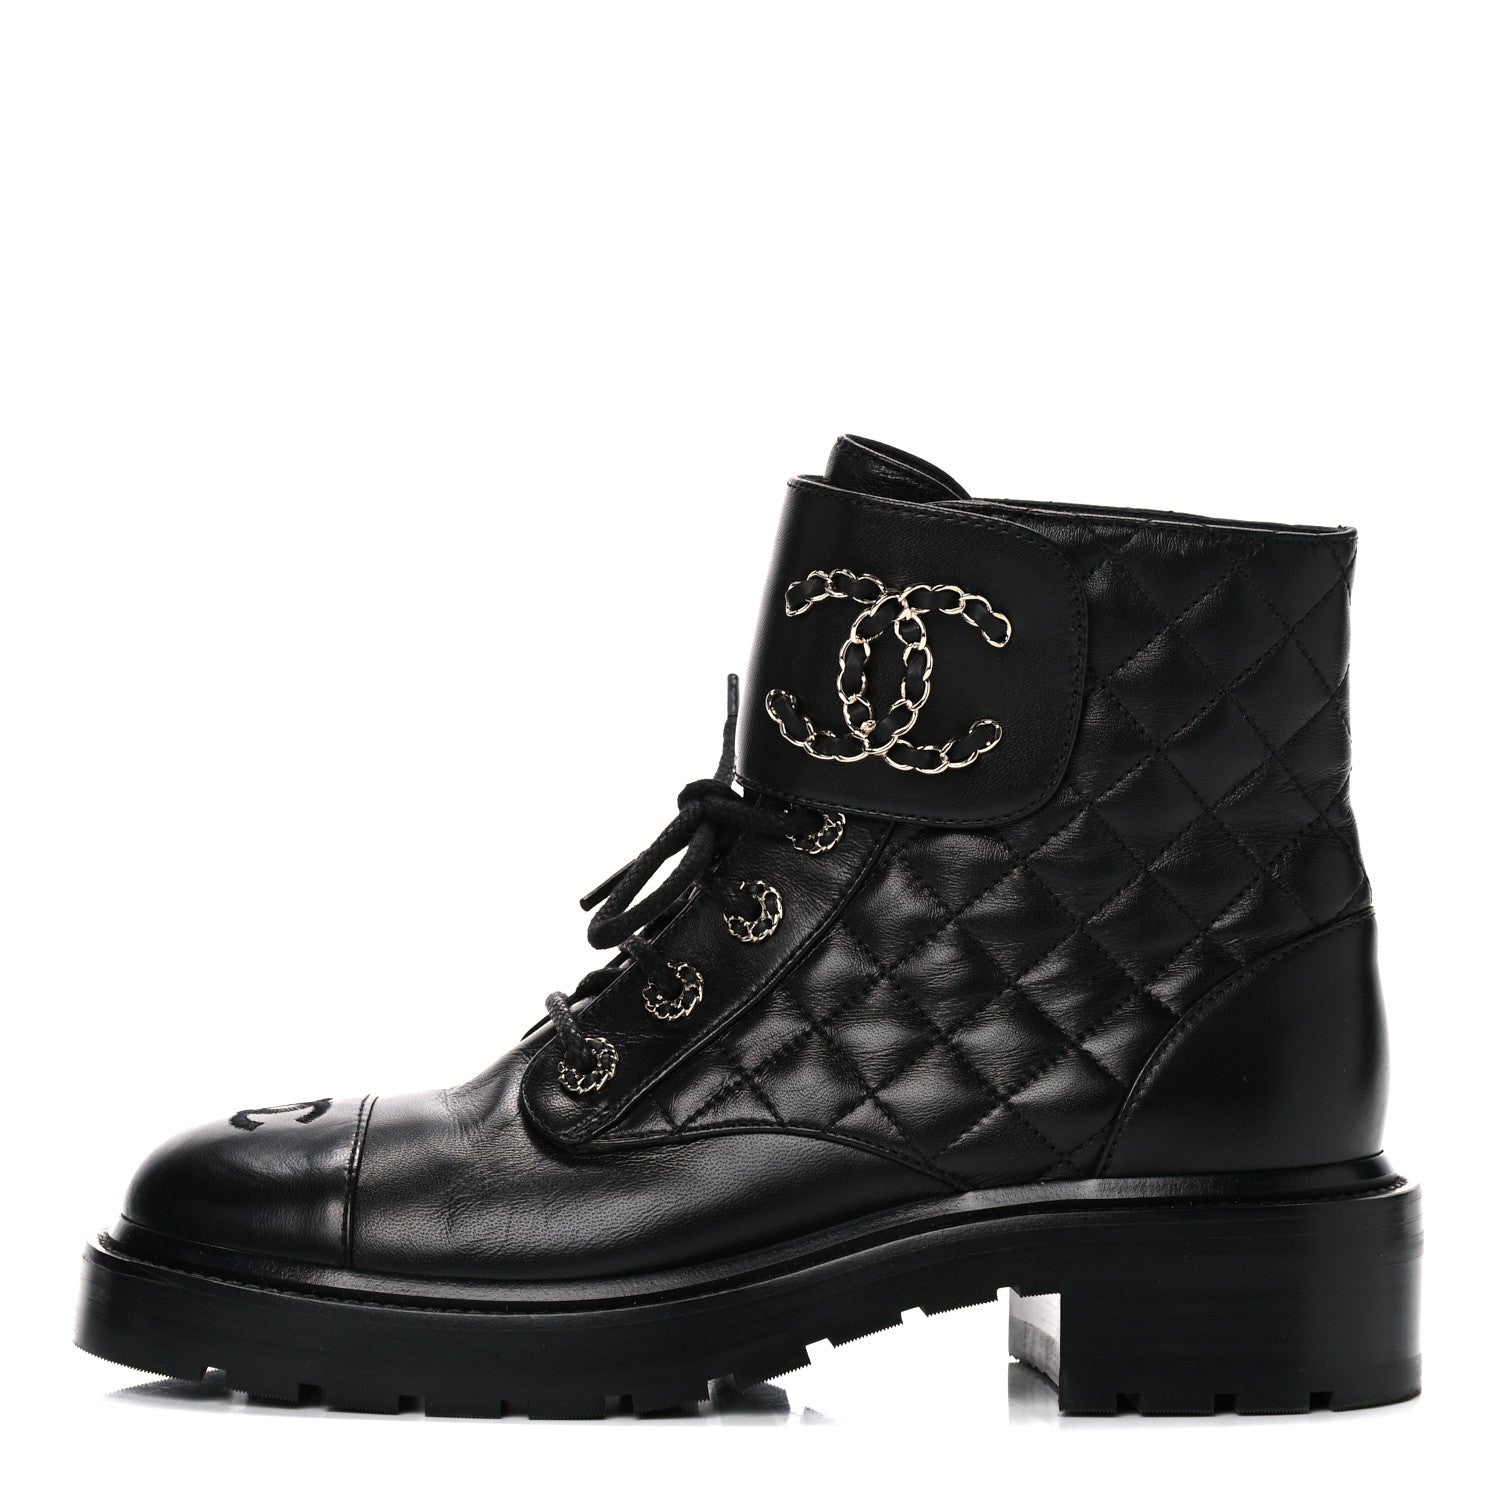 CHANEL QUILTED LAMBSKIN COMBAT BOOTS